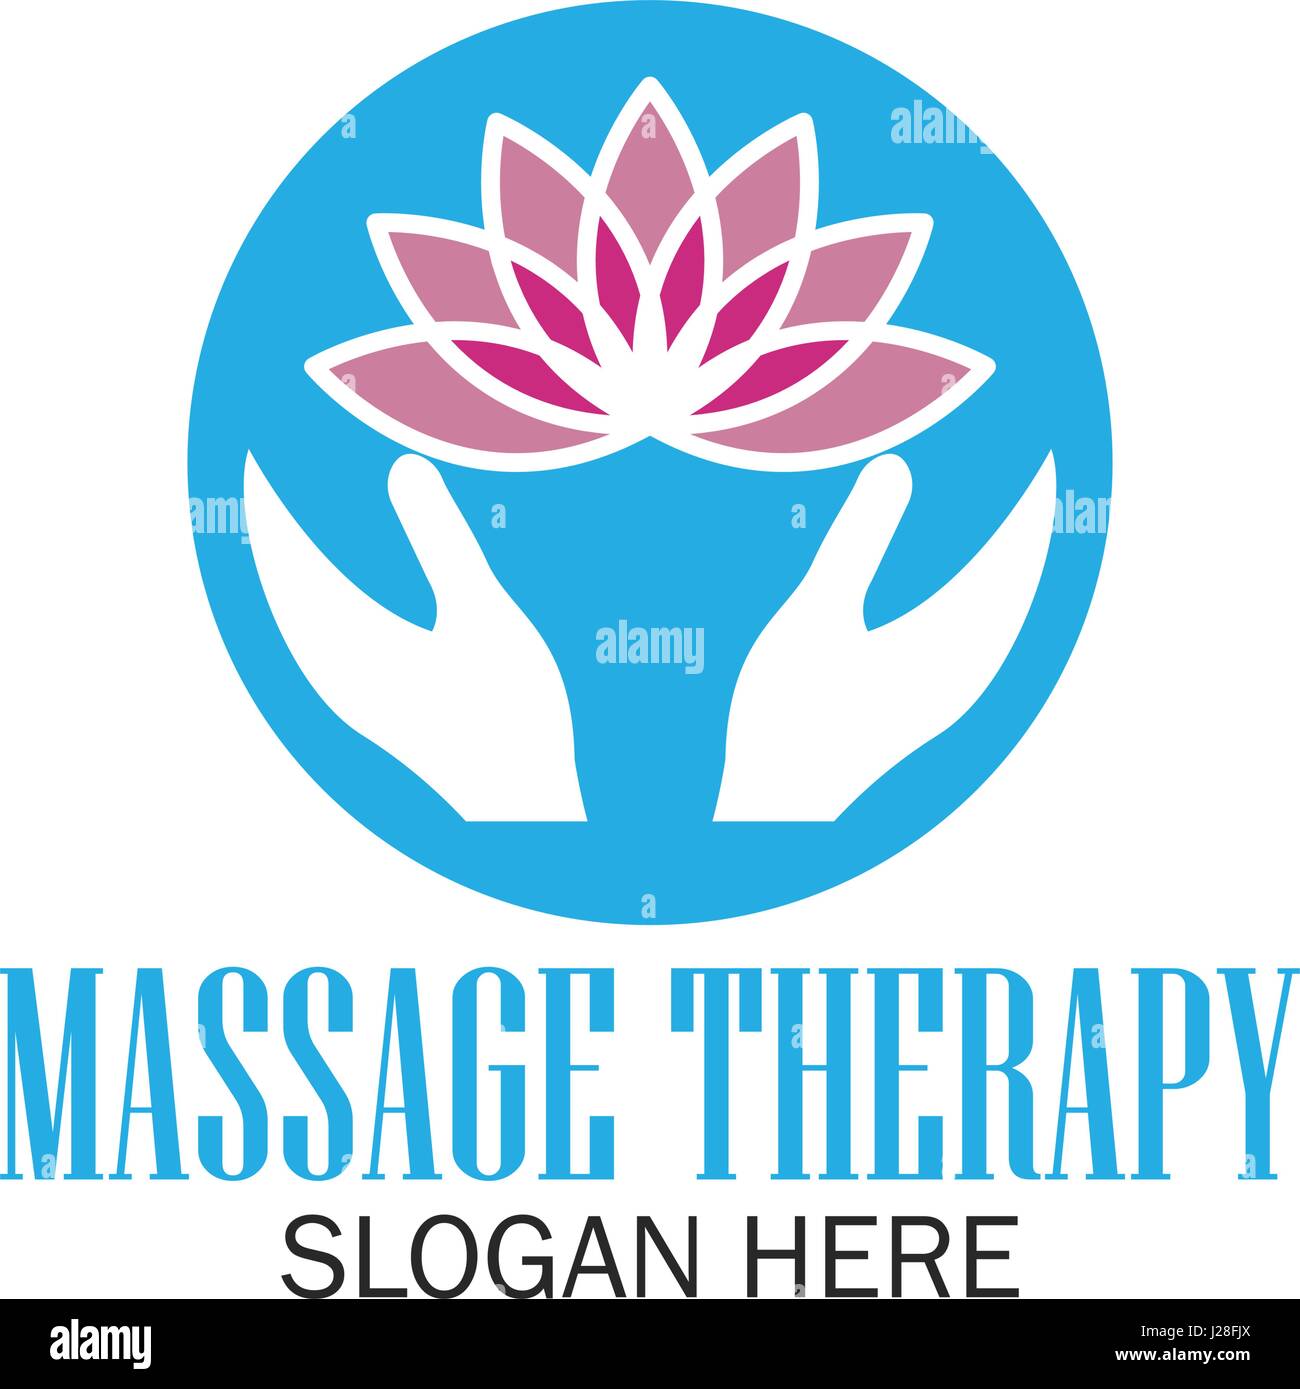 Massage Therapy Logo With Text Space For Your Slogan Tagline